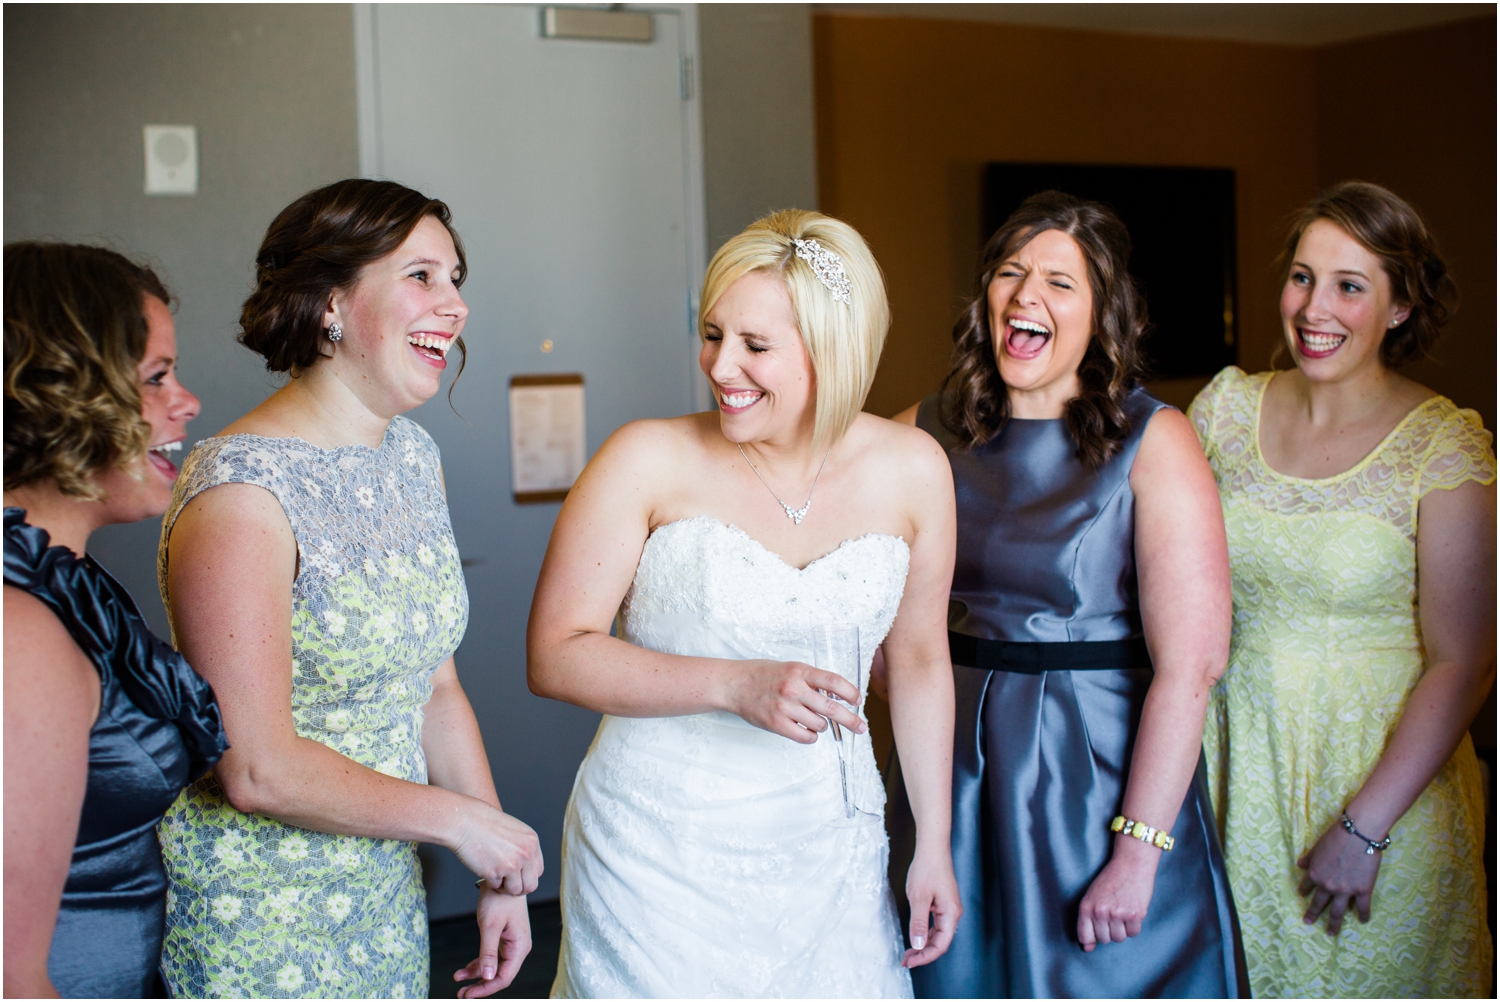 Best Weddings of 2014 | Favorite Photos of the year | Chicago Wedding Photographer | Jill Tiongco Photography